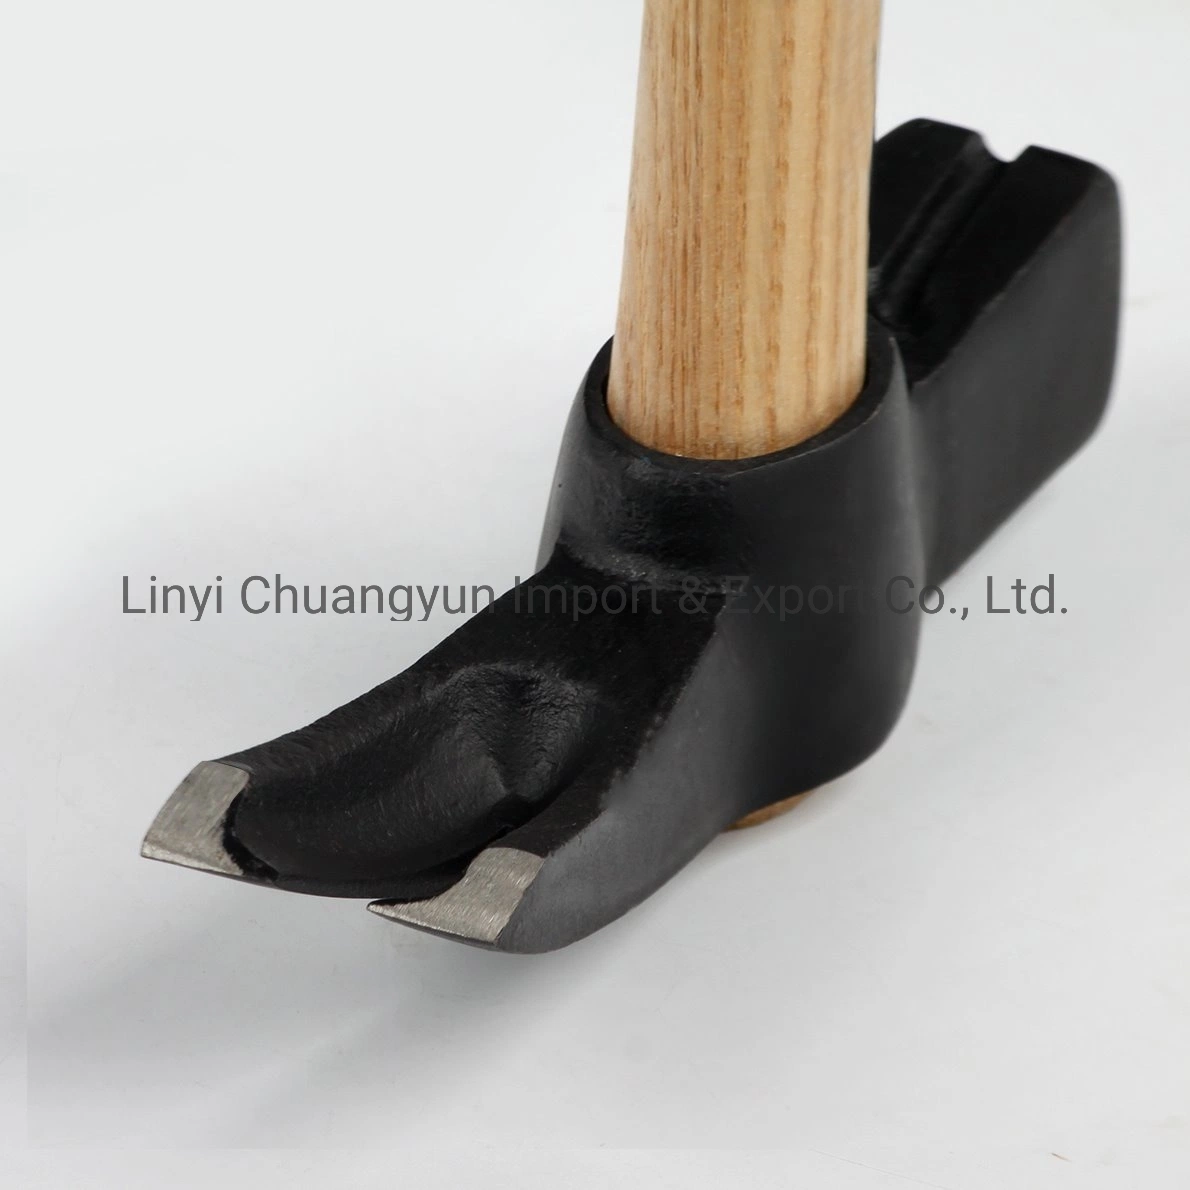 OEM Alloy Steel Split Head Hammers Chromate Plated Handle Forging Claw Hammers